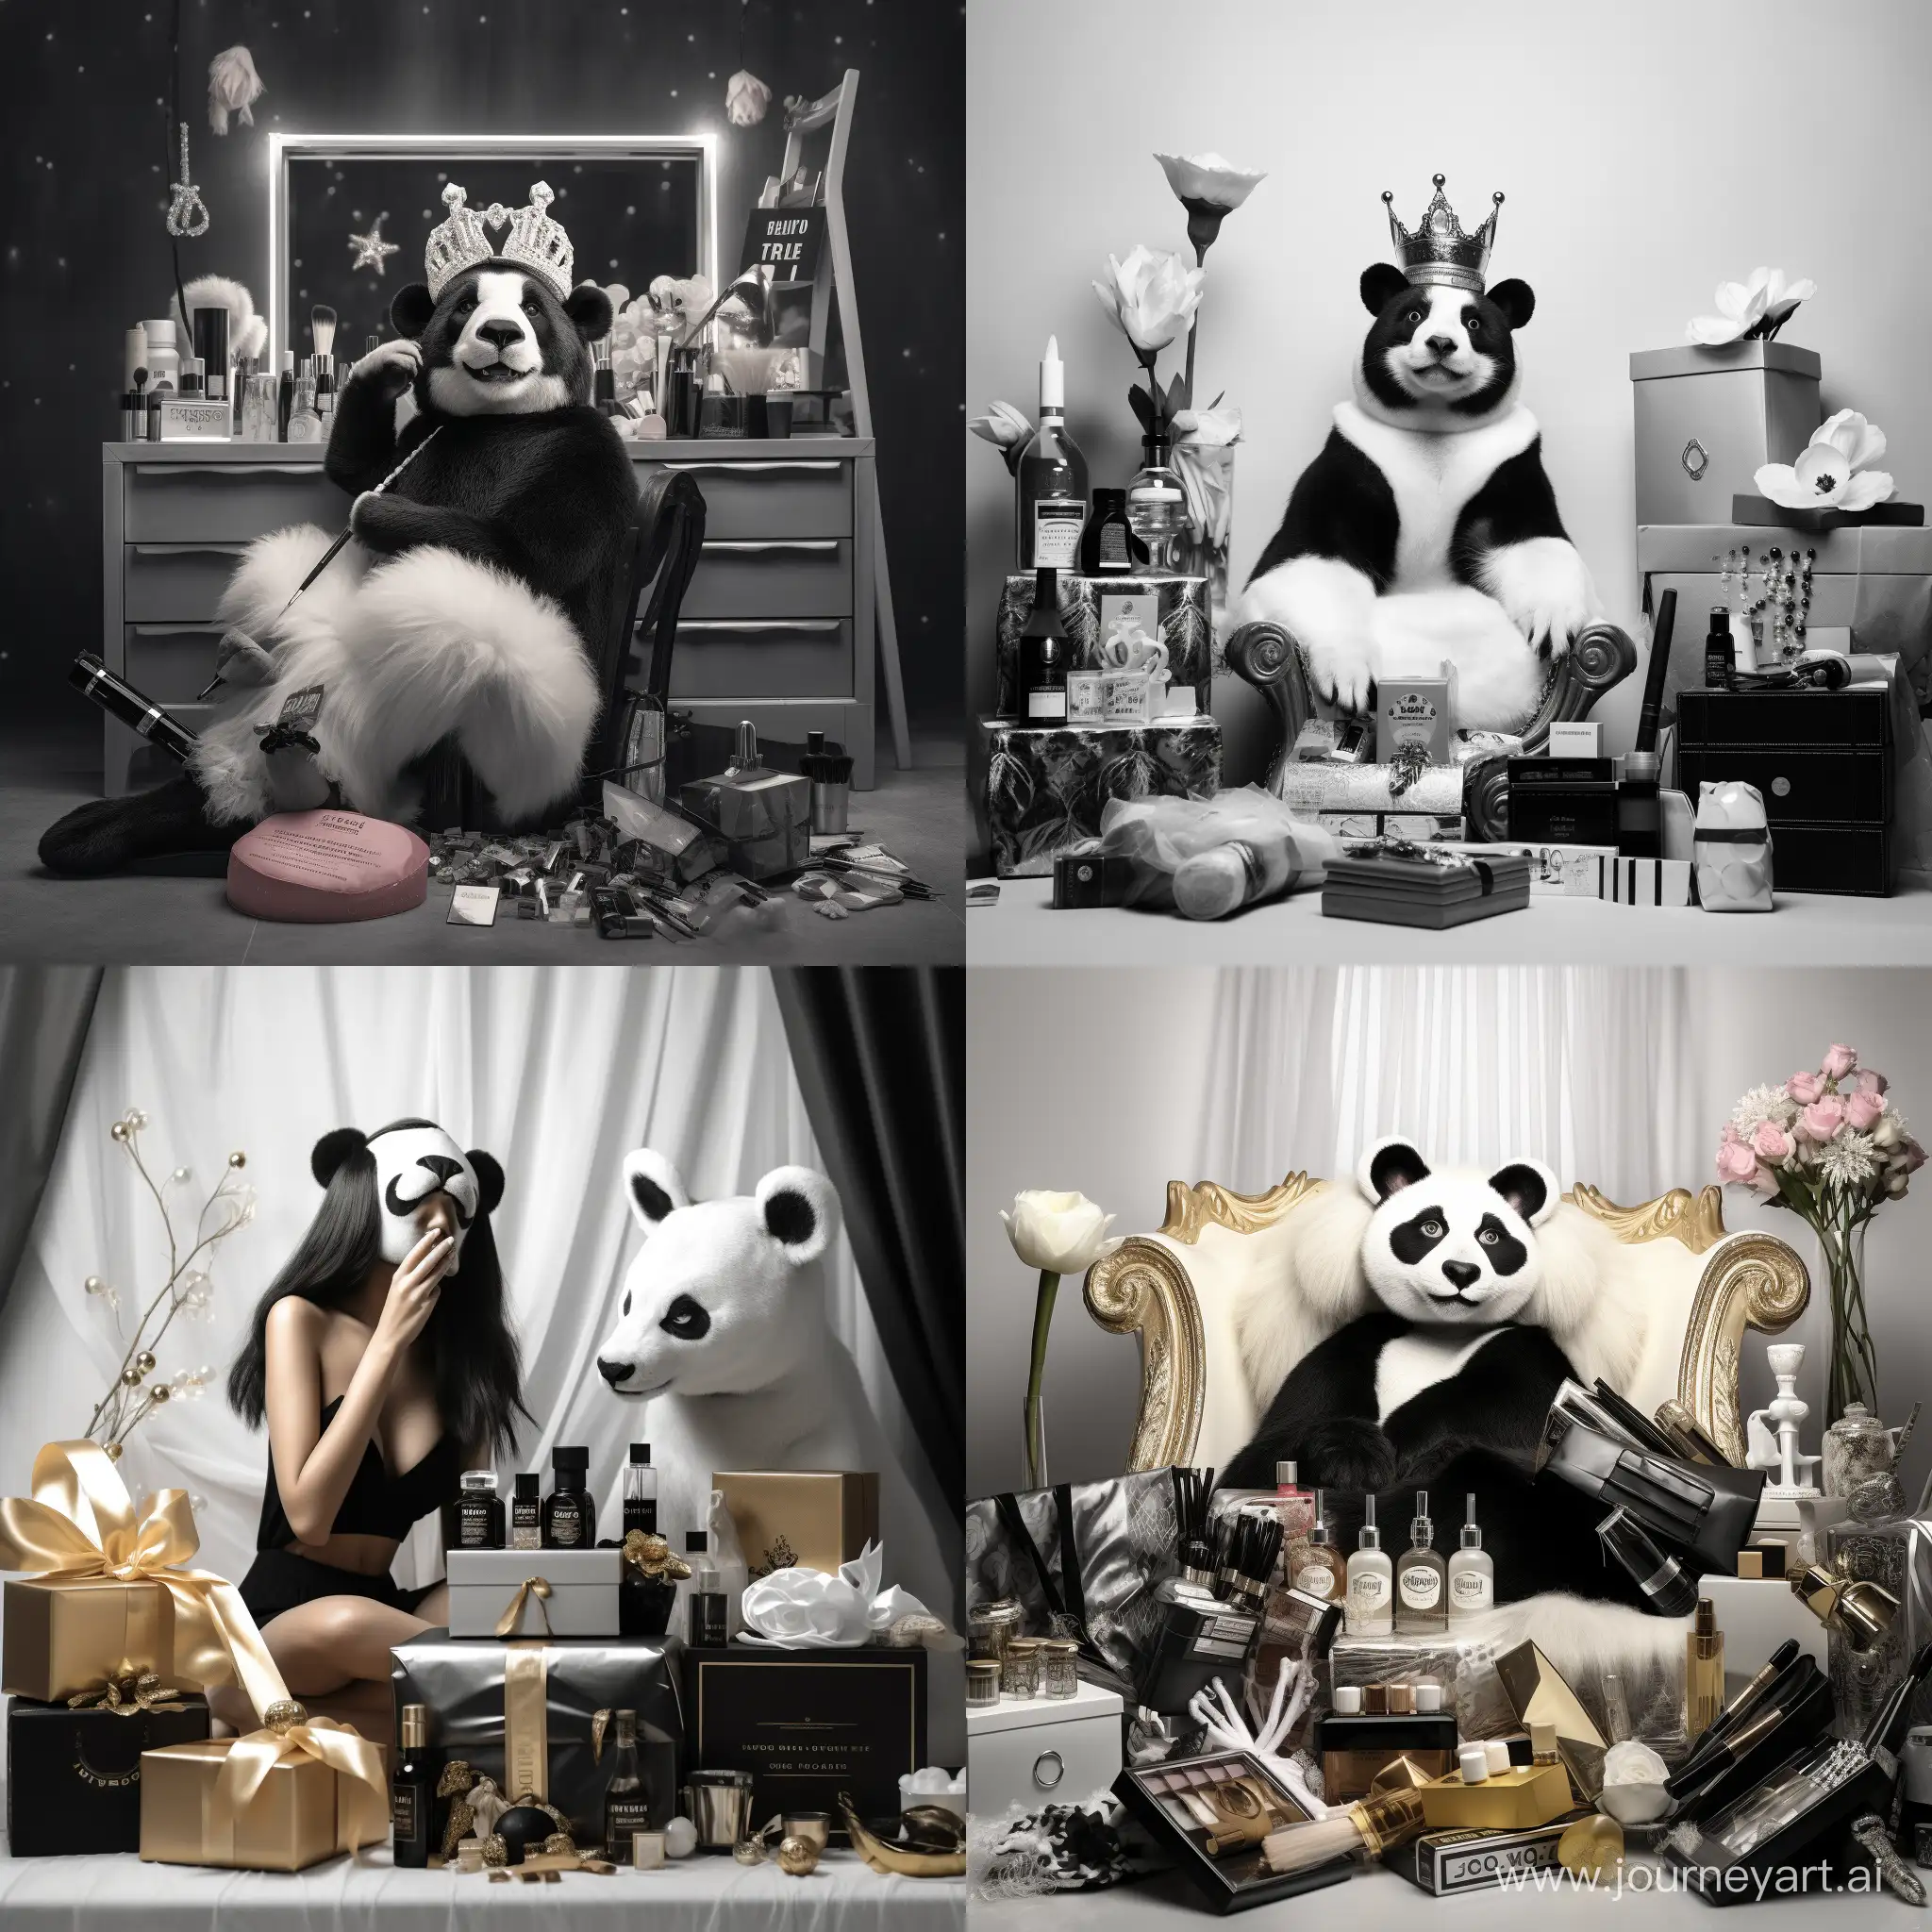 Joyful-Black-and-White-Panda-Queen-in-a-Beauty-Salon-with-Golden-Crown-and-Beauty-Products